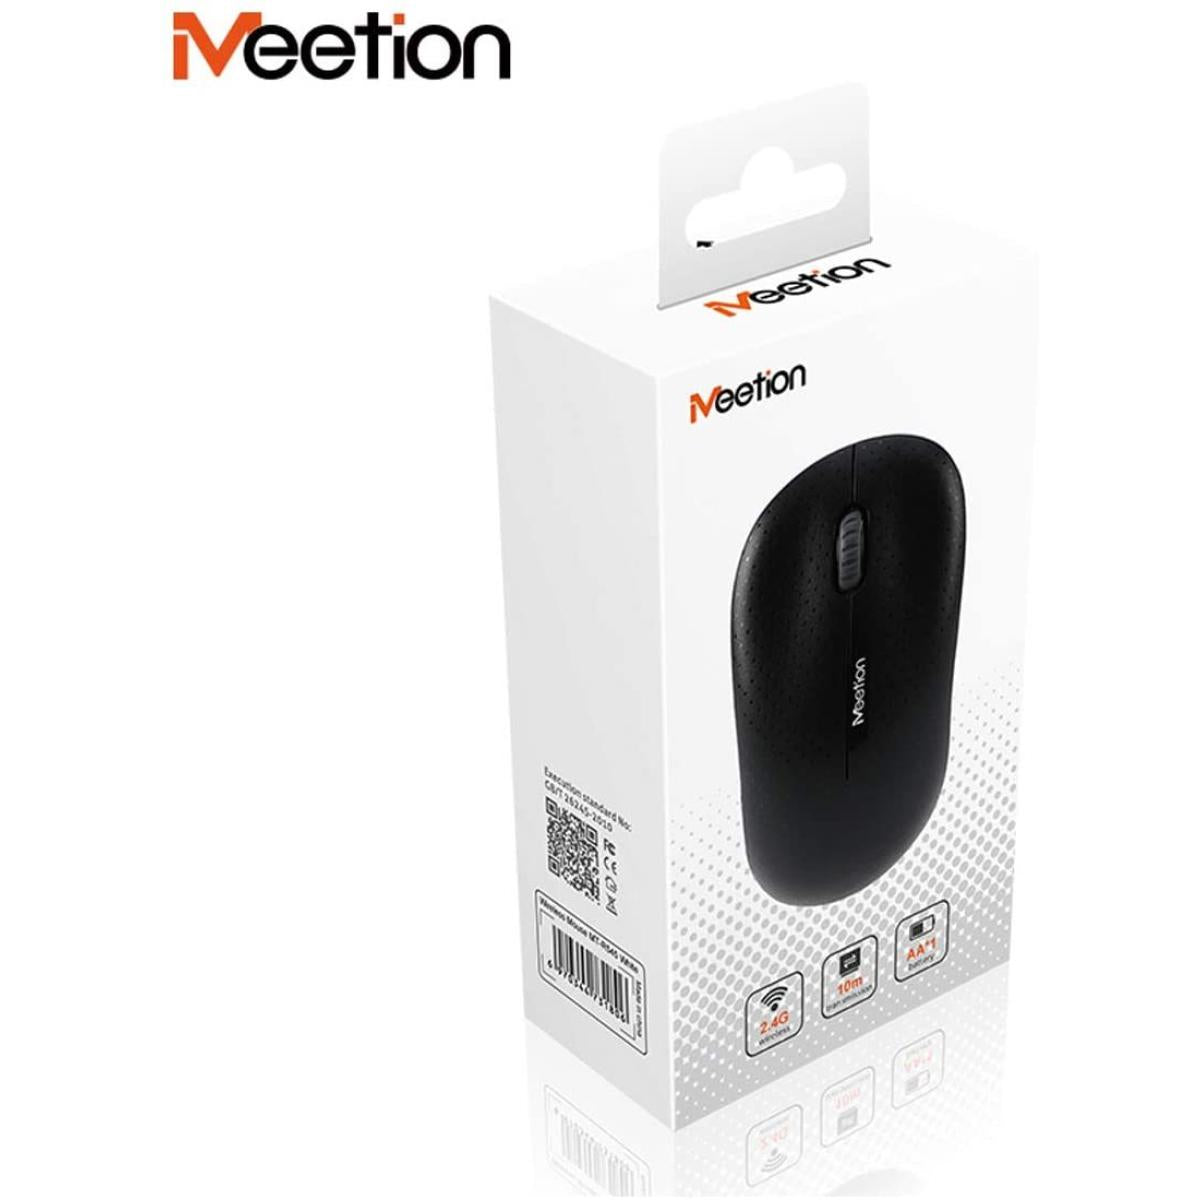 MeeTion Cordless Optical Usb Computer 2.4GHz Wireless Mouse - Black